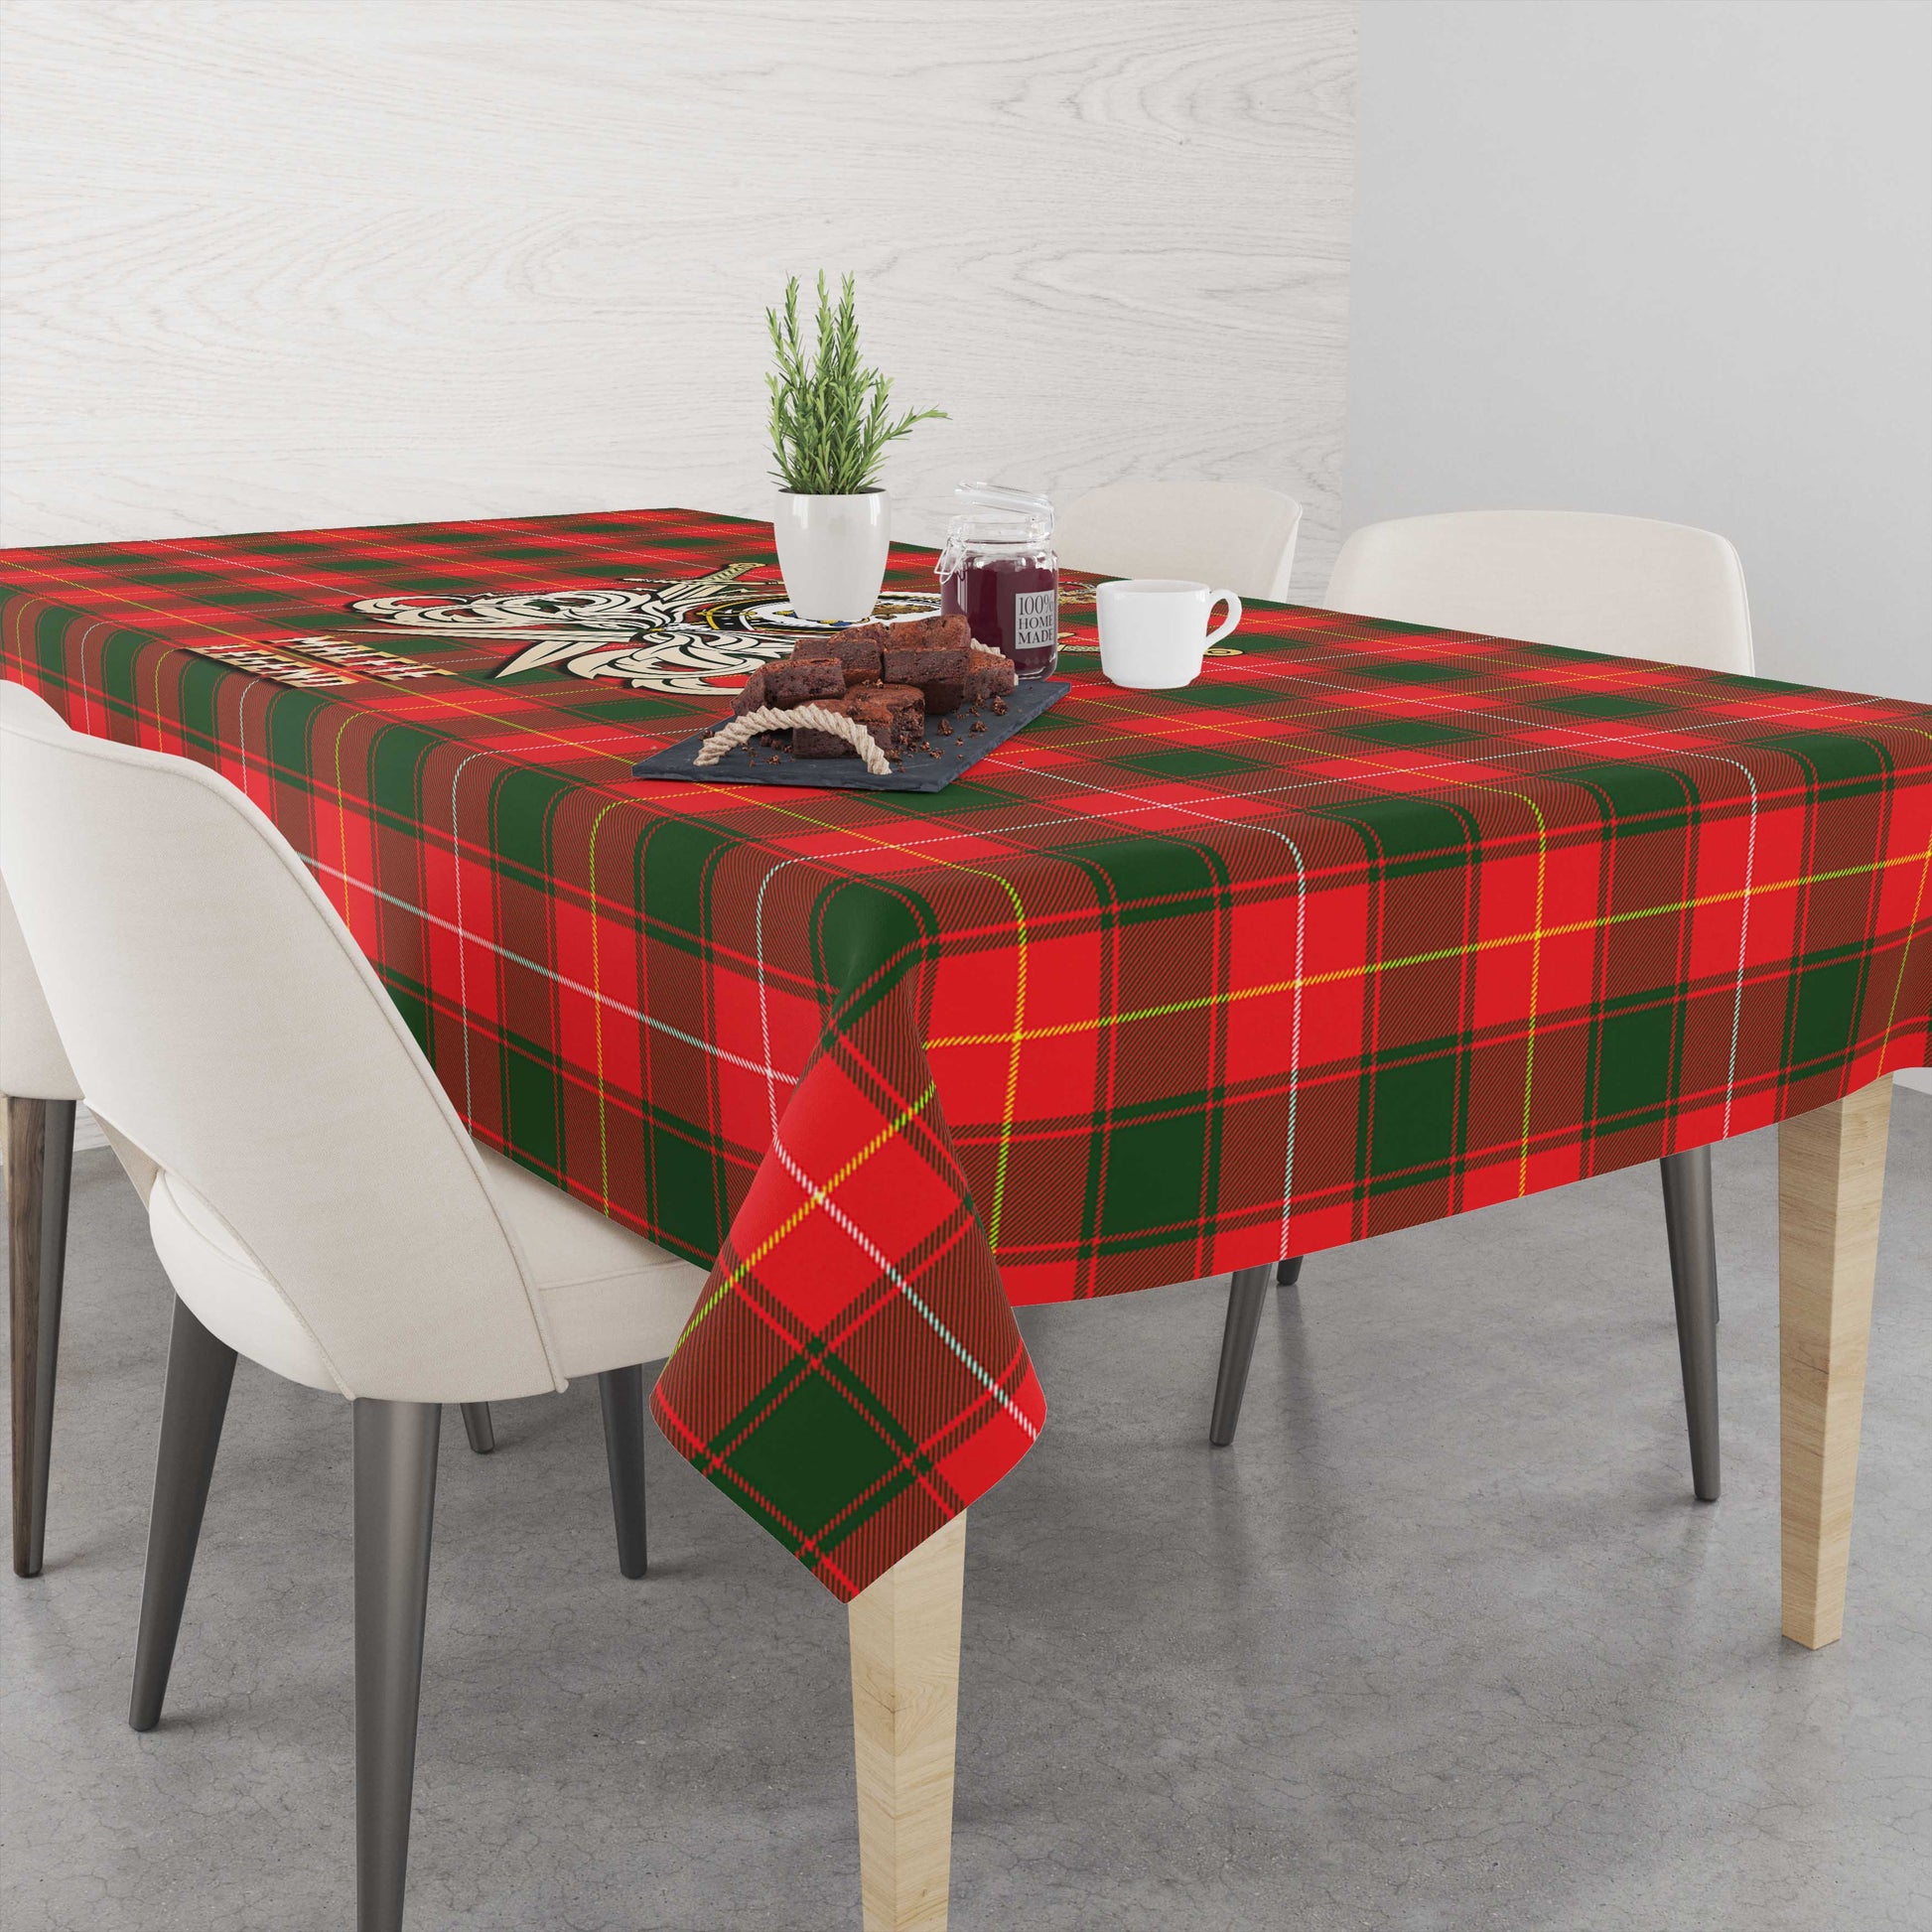 Tartan Vibes Clothing MacFie Modern Tartan Tablecloth with Clan Crest and the Golden Sword of Courageous Legacy